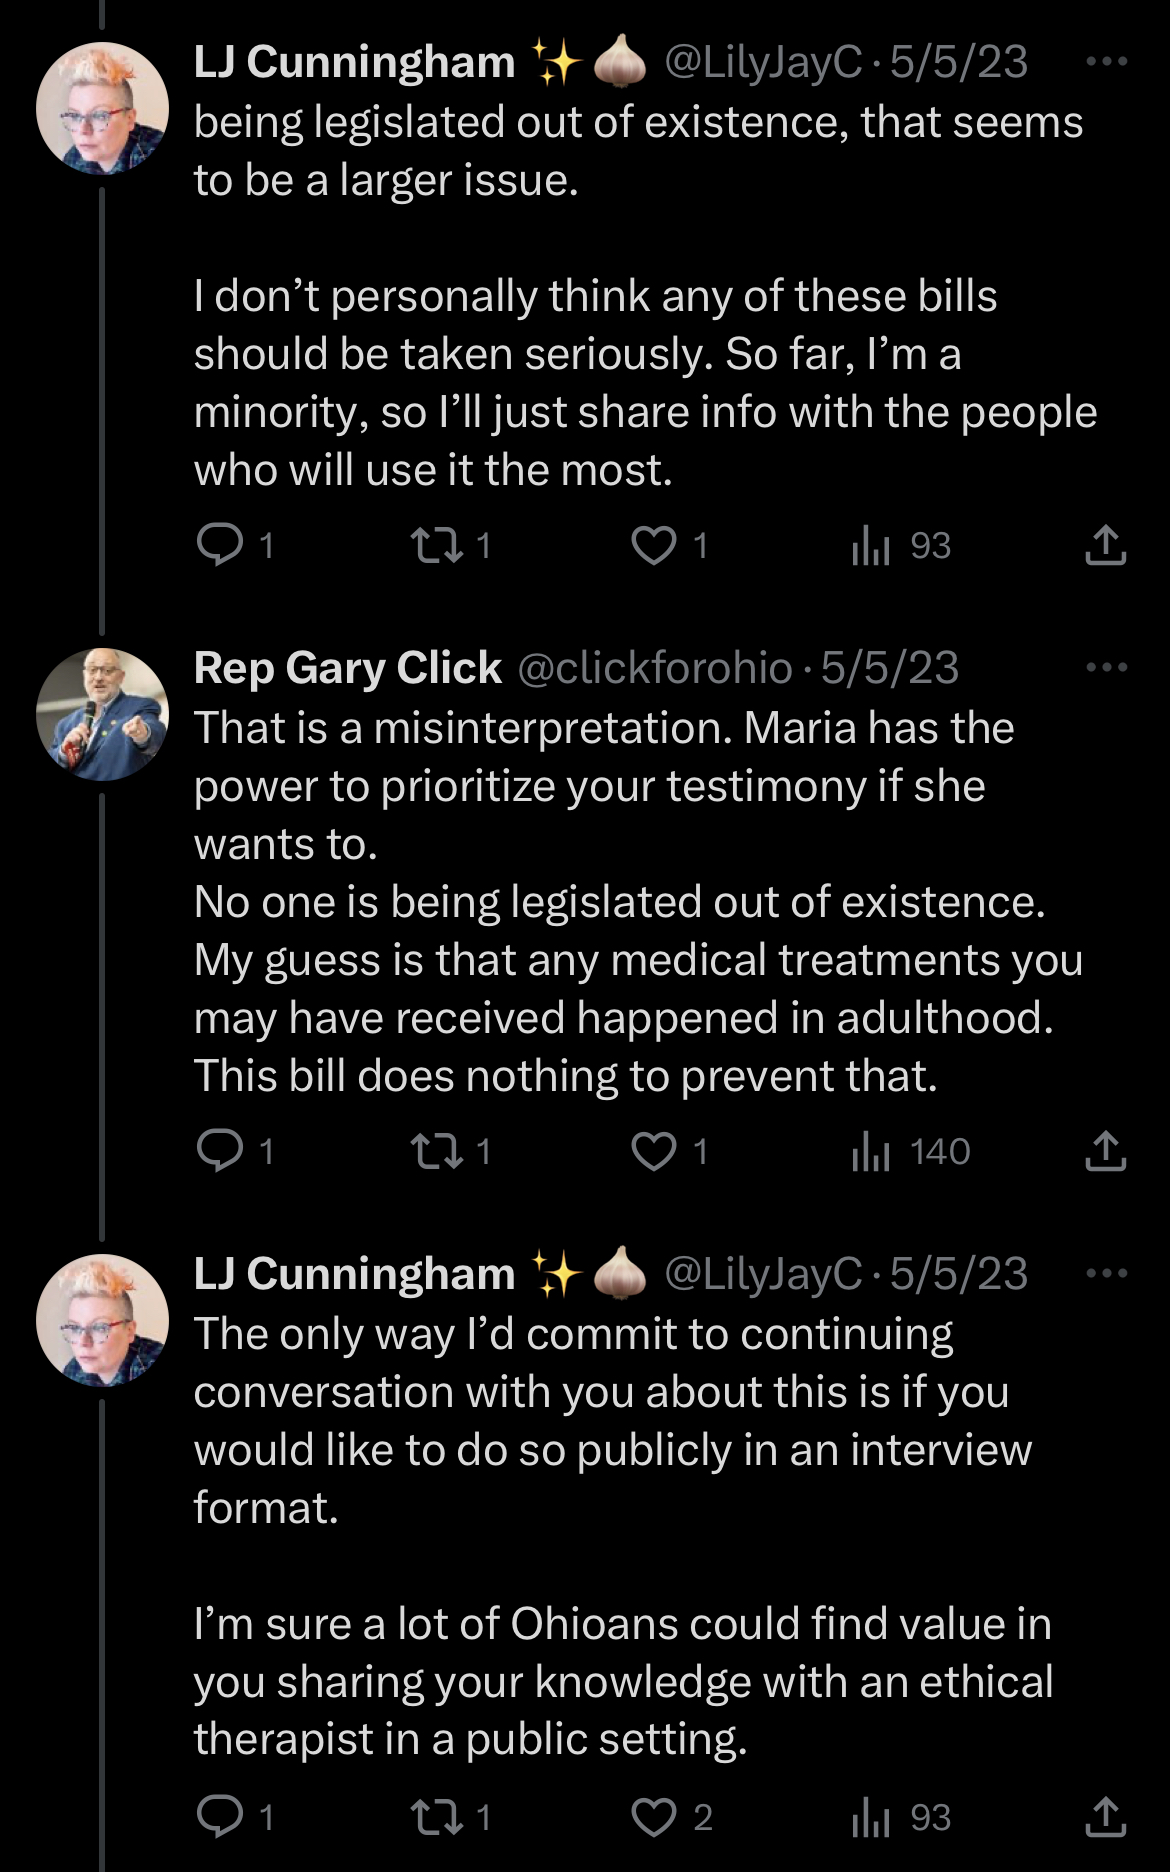 Continued thread where I explain to Gary that my feeling is that the larger issue is, there's no safe guards that dis allow for these bills in the first place, and I am being legislated out of existence. Gary replies that this is "a misrepresentation" and Tweets that "Maria" could let me testify if she wanted to. I ignore that and offer to speak in a public forum, as I'm an ethical counselor and perhaps others would find value in that.